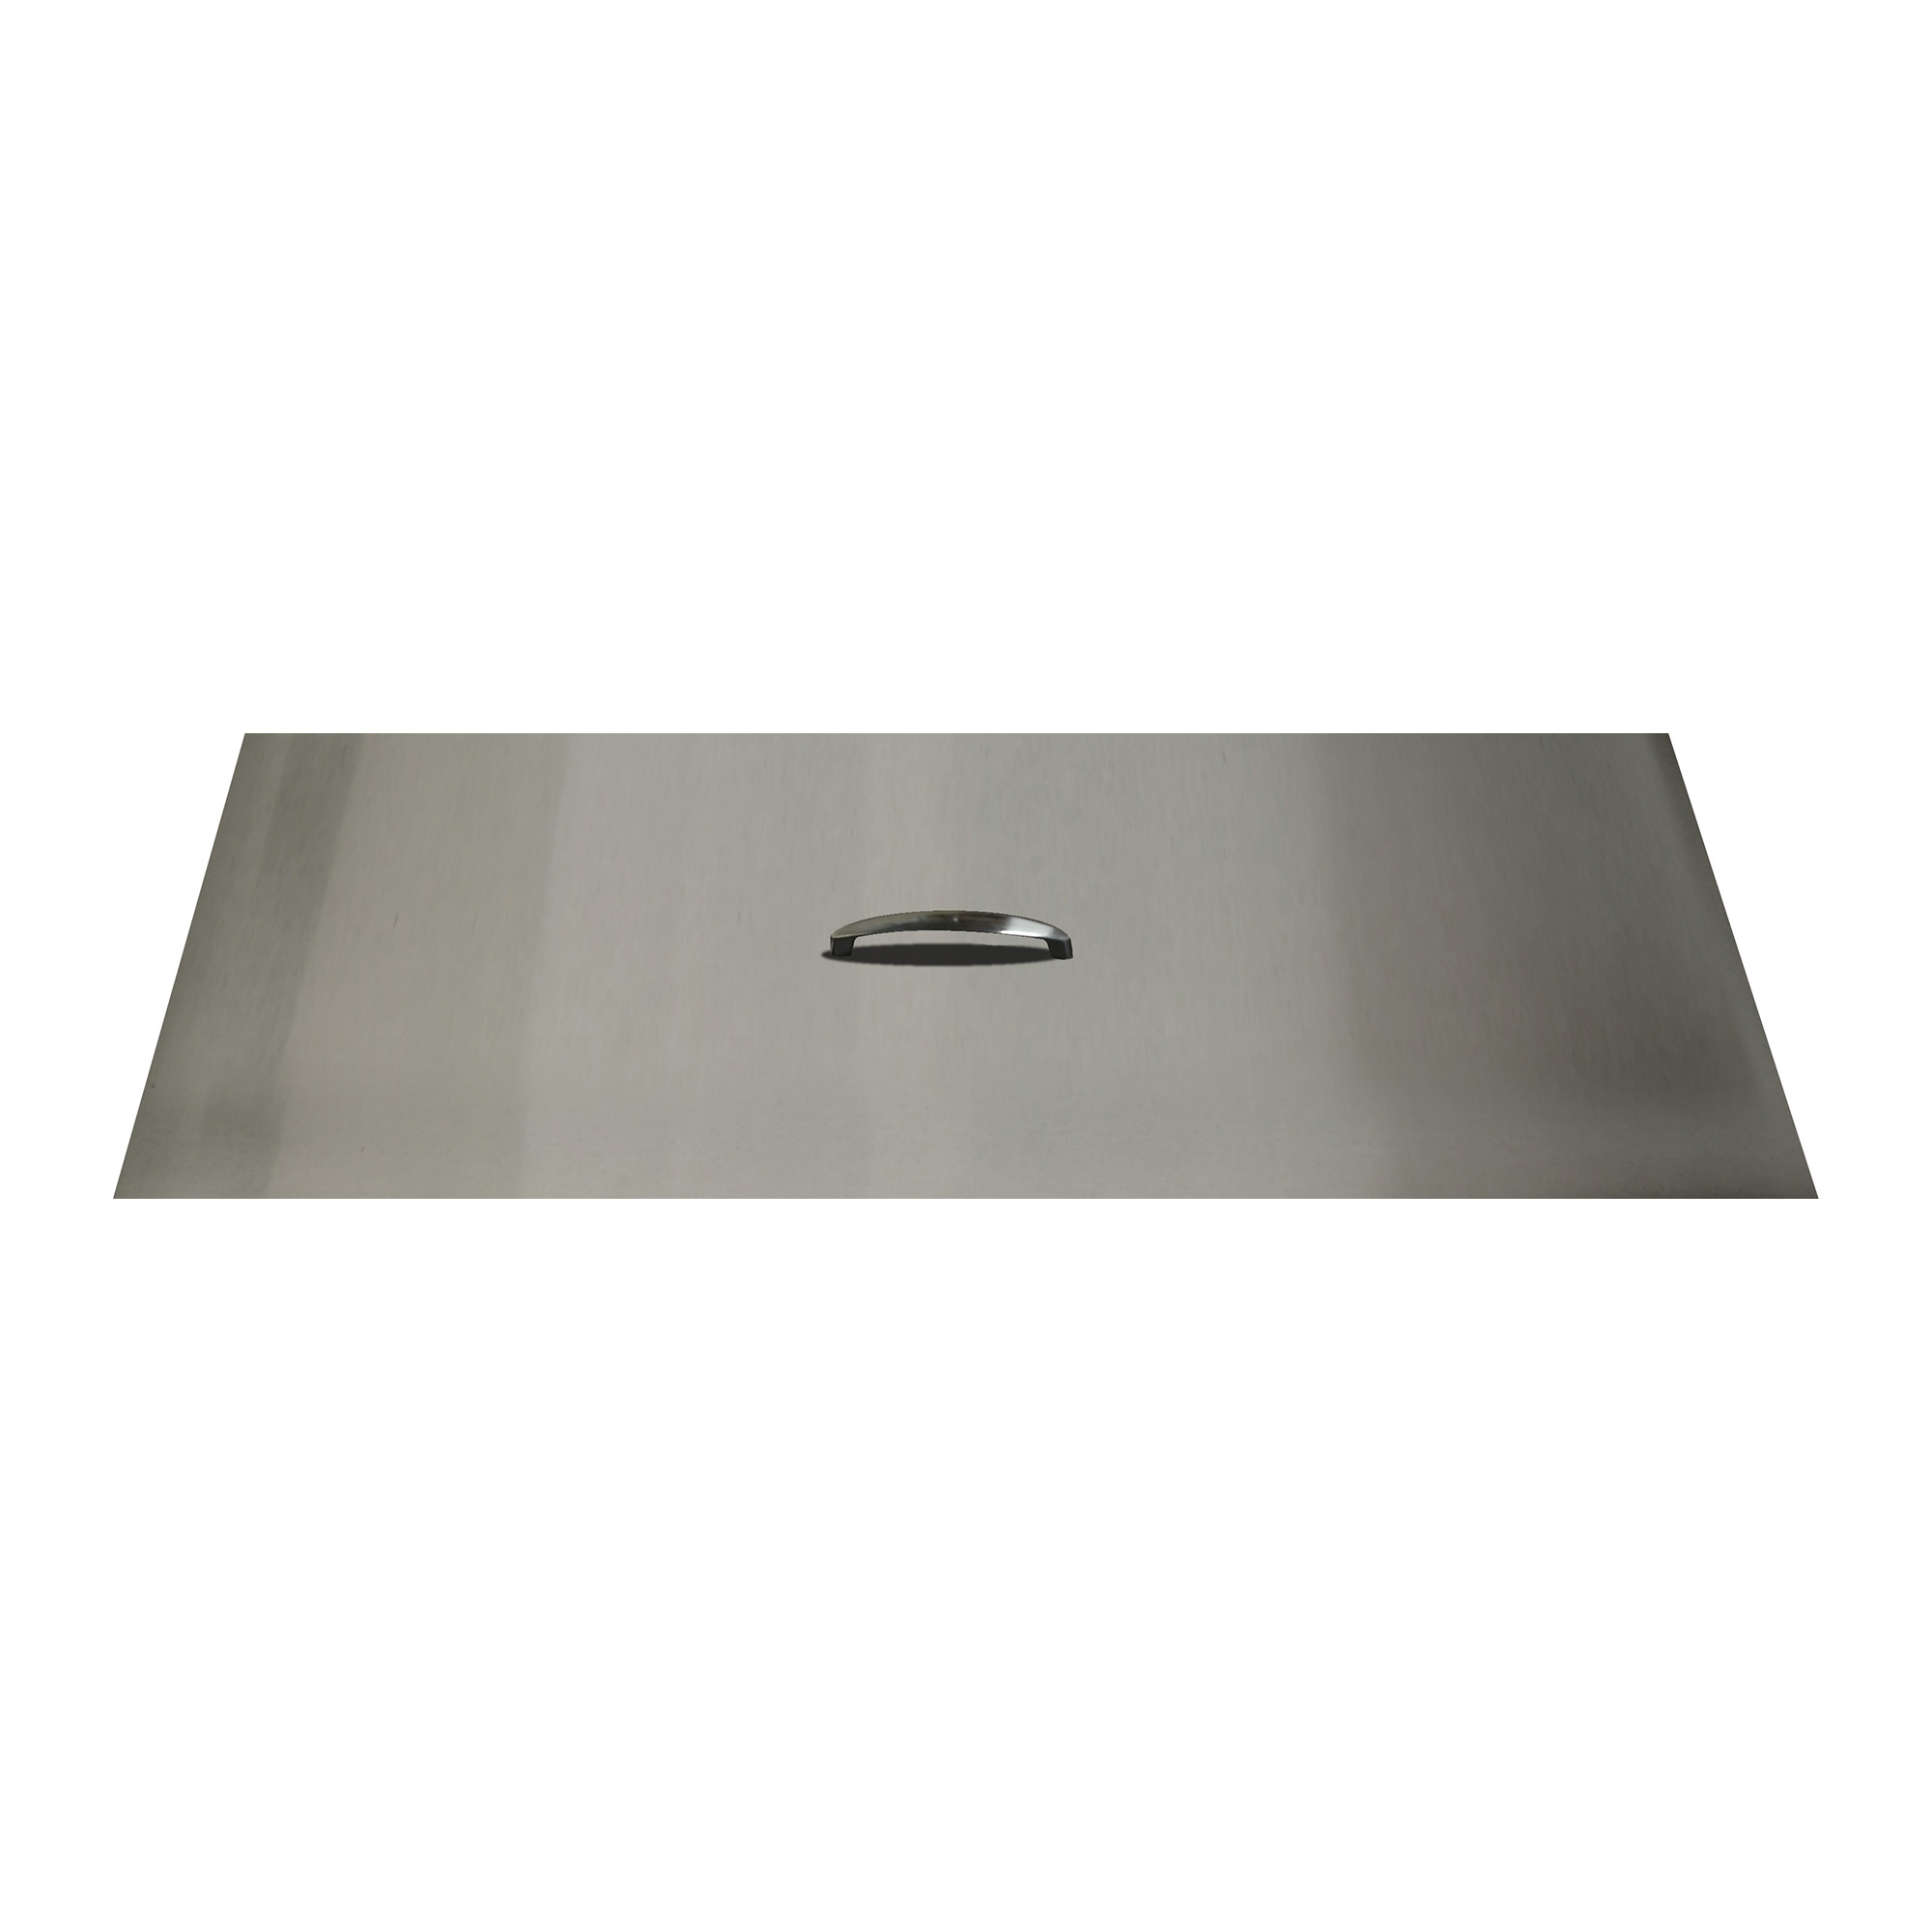 Brushed Stainless 10 inch Steel Rectangle Cover - Outdoor Plus (Stainless Steel 10 inch Rectangle Cover/Topper: 10 x 20)